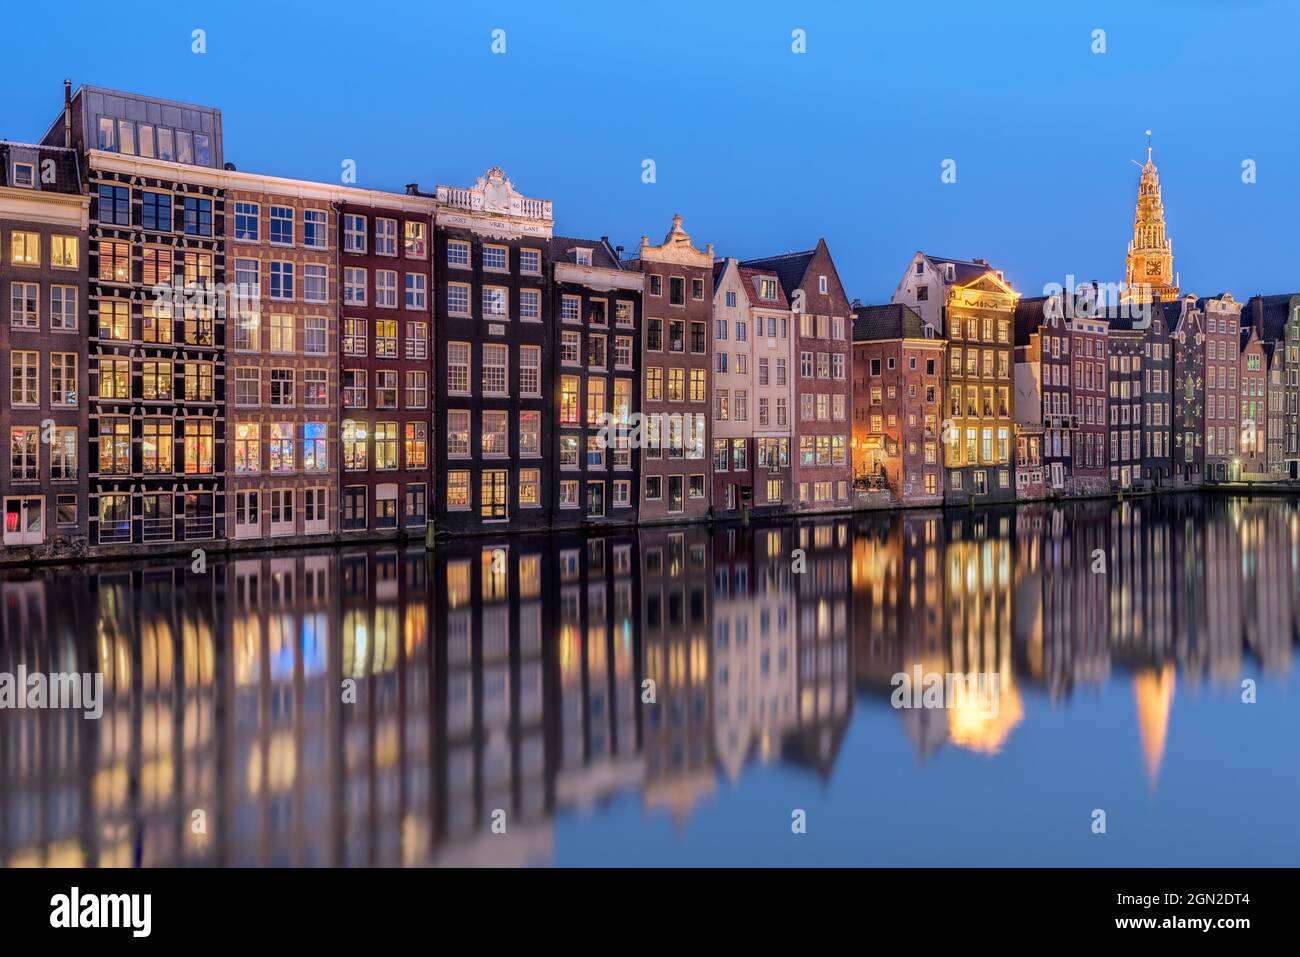 NETHERLANDS, AMSTERDAM, TYPICAL HOUSES AND CHURCH DURING BLUE HOUR Stock Photo